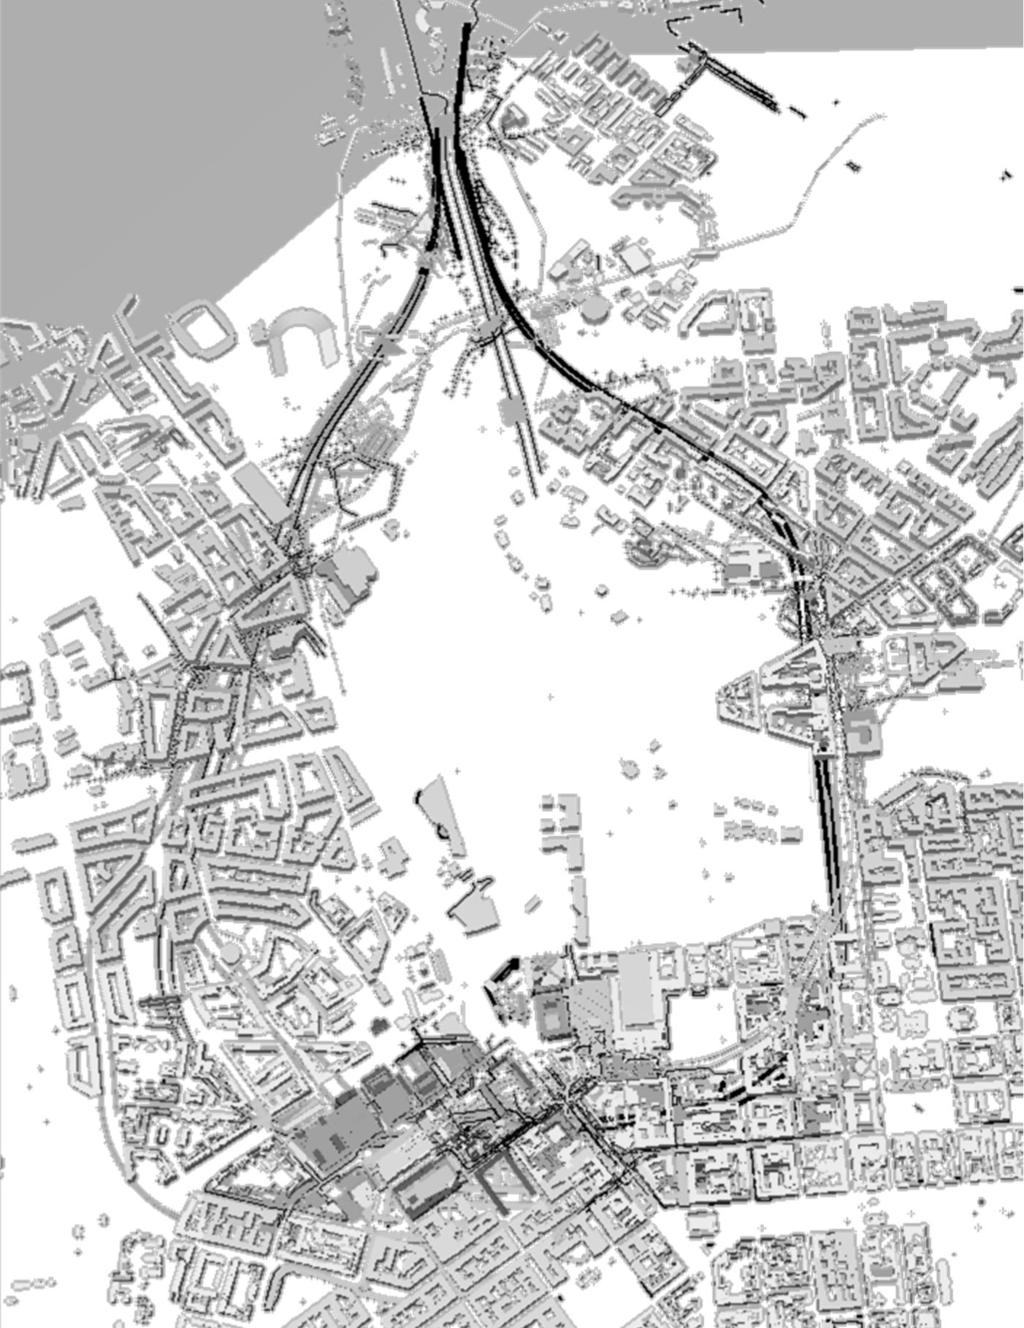 Largest design project based on information / product modelling in Finland. Complex, built, urban and historical environment.